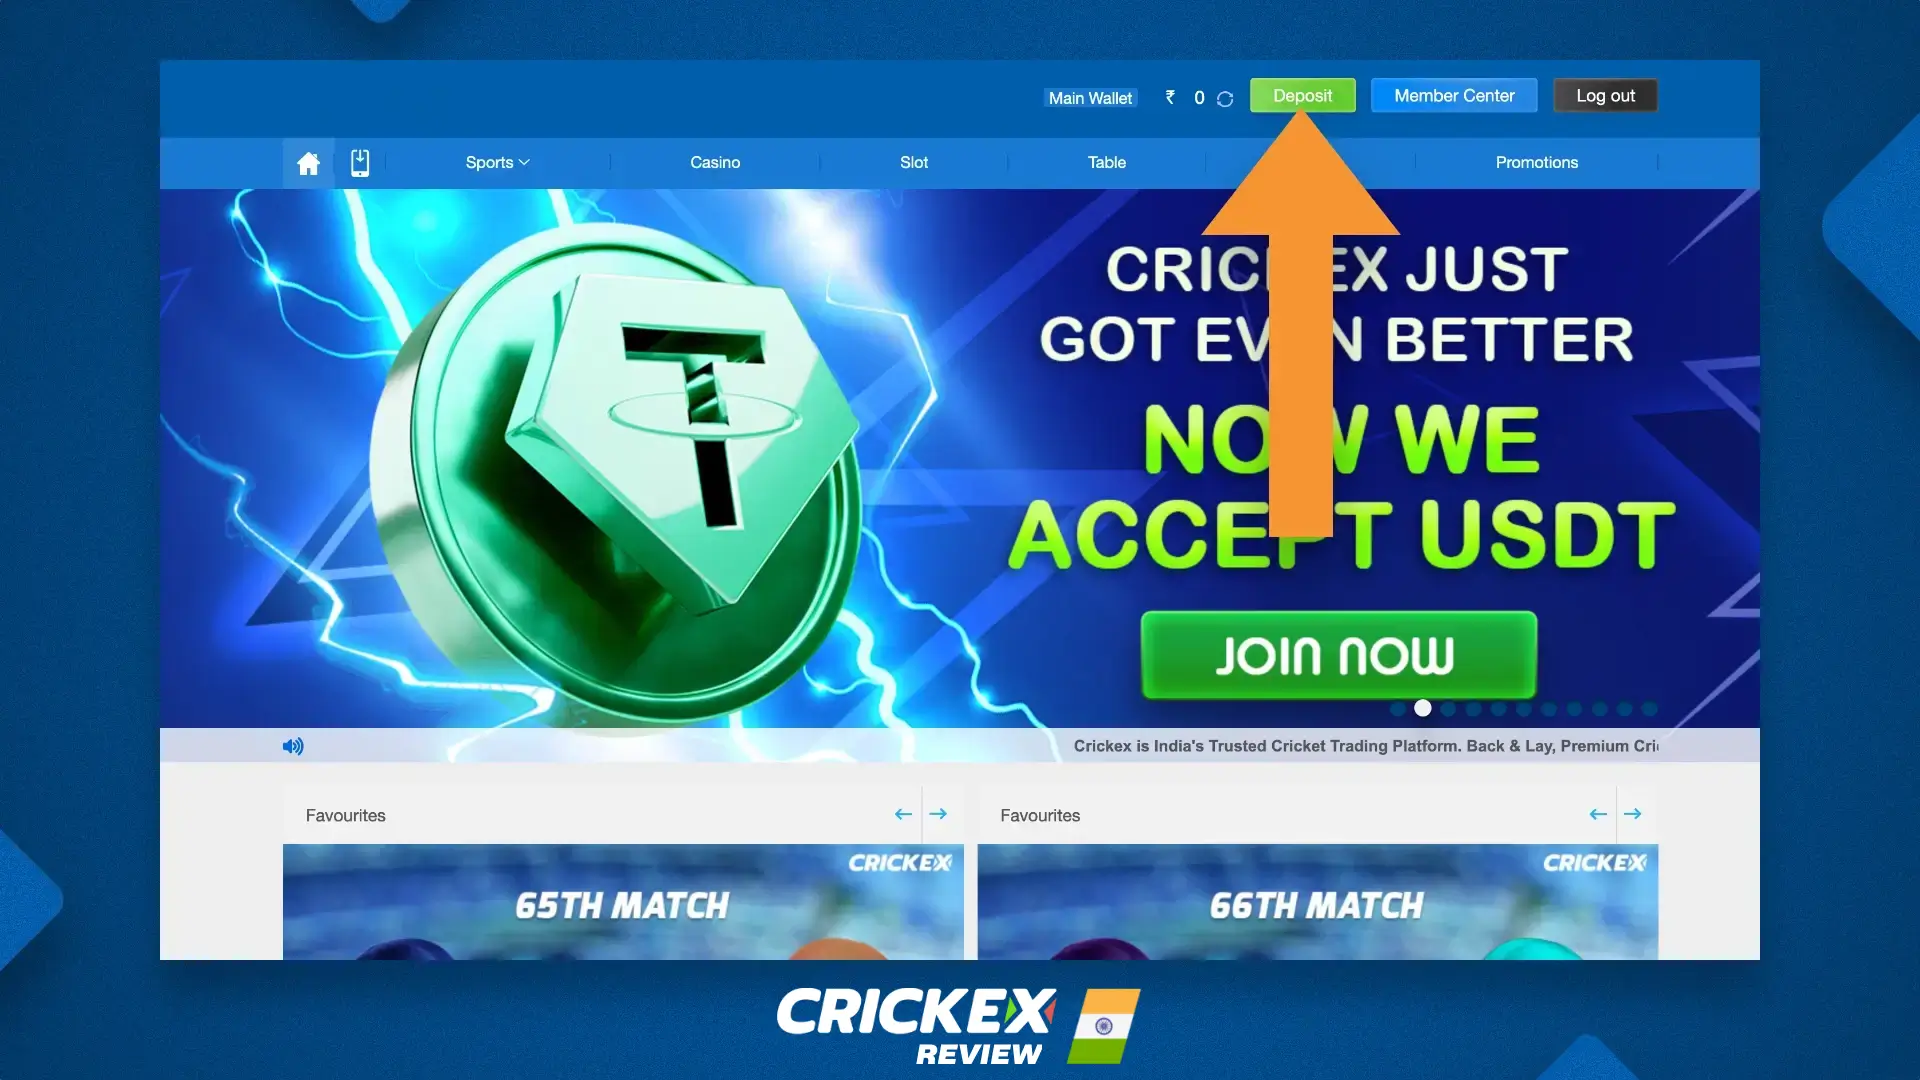 Making a deposit on Crickex website in India